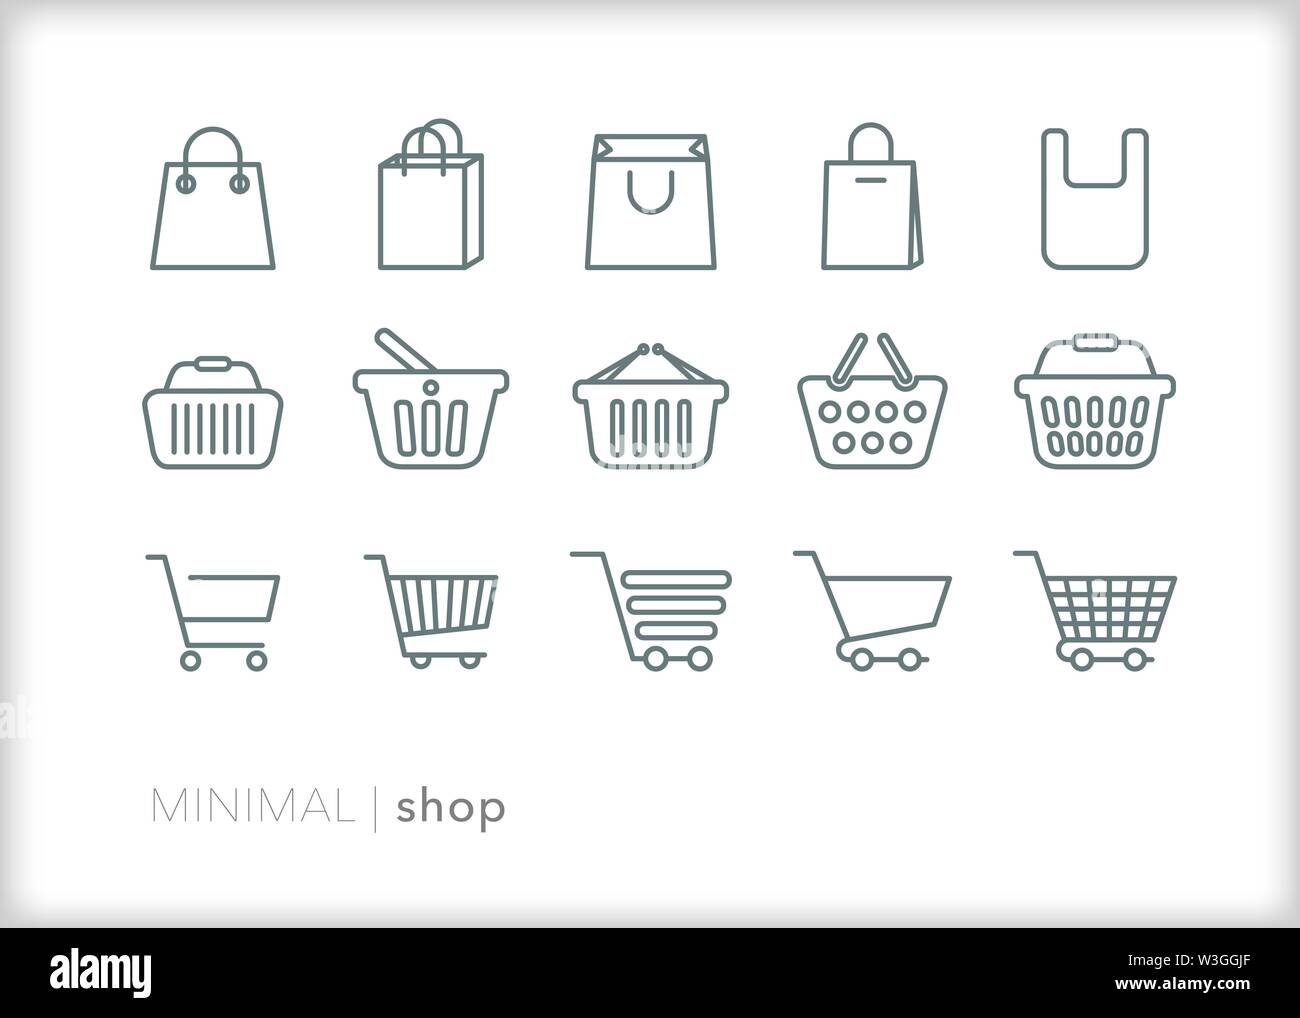 Set of 15 shop line icons carts, bags, and baskets for grocery shopping or checkout Stock Vector